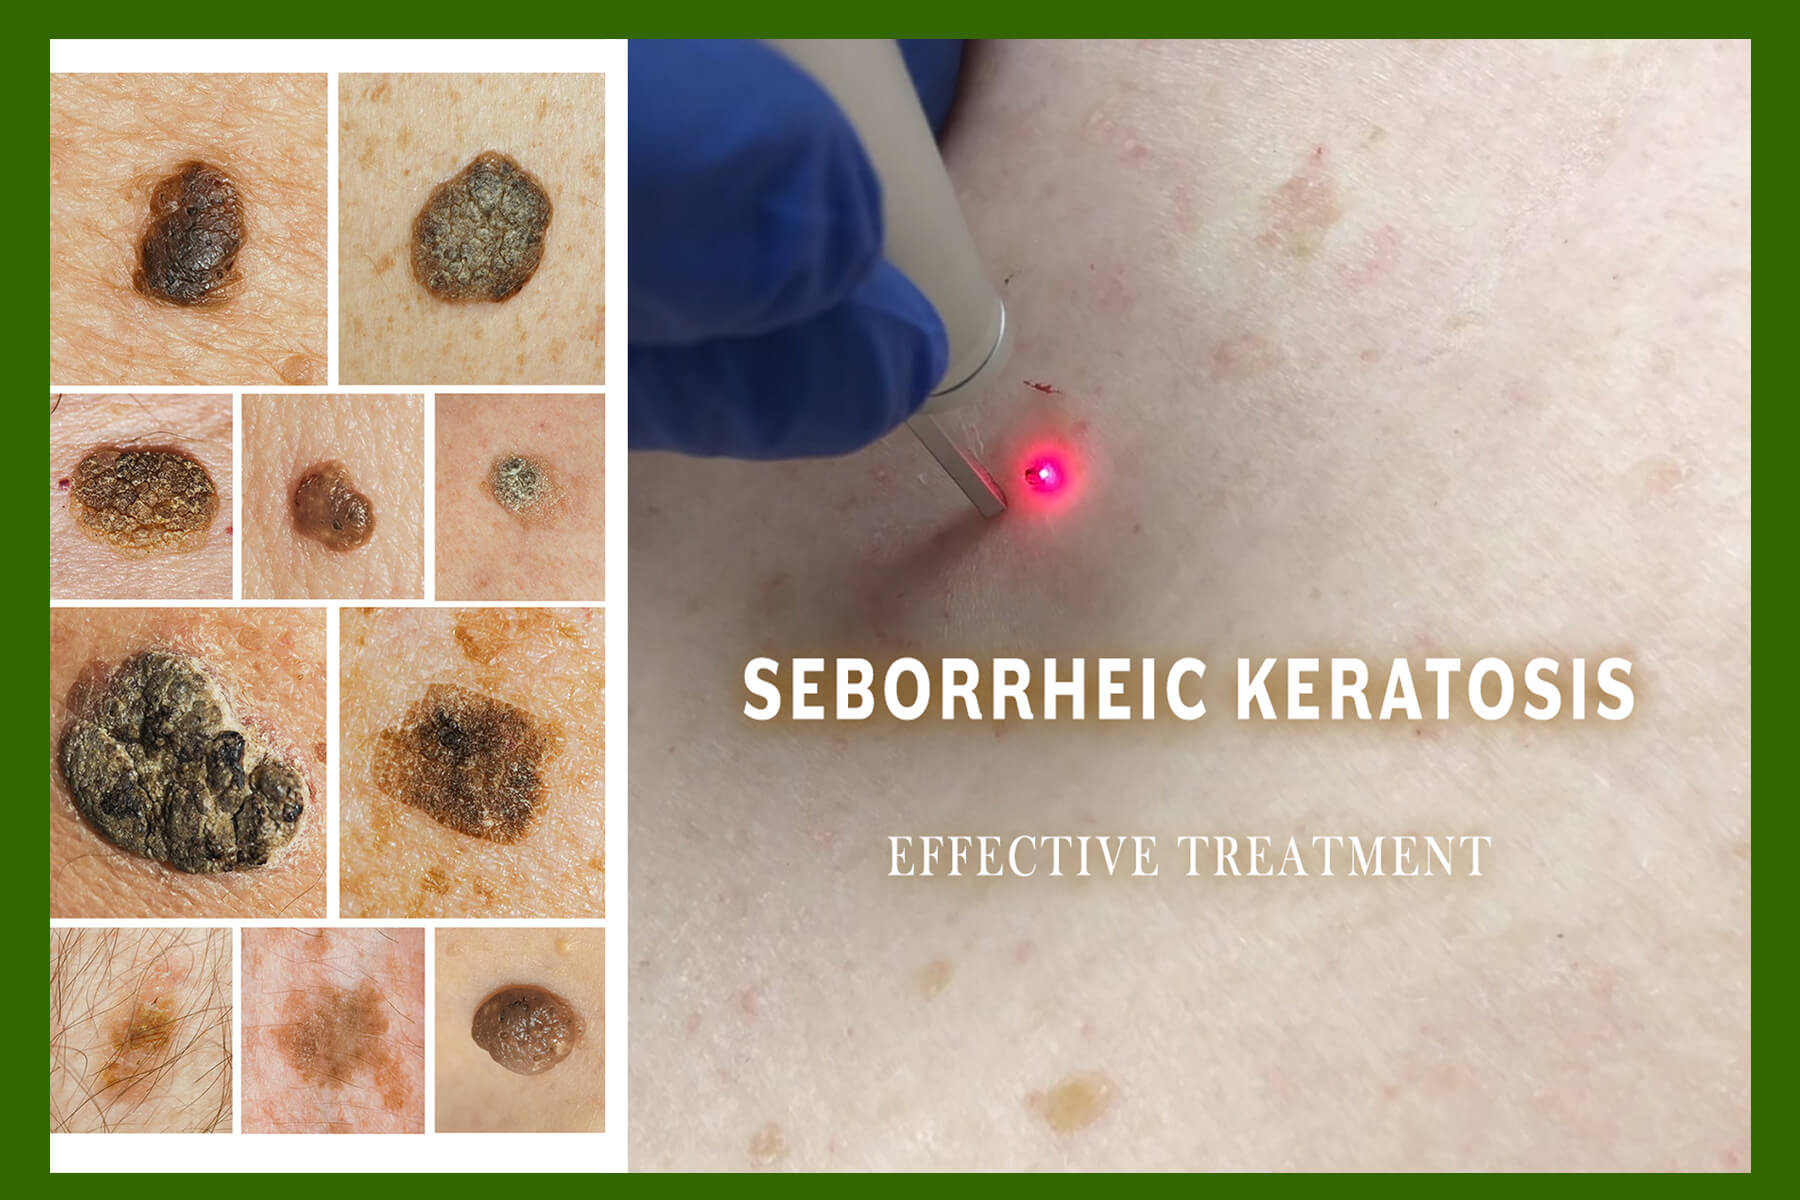 Seborrheic Keratosis Removal Treatment in Laval and Greater Montreal Area – Causes, Risks and Painless Treatments - CO2 Laser Treatment at LABELLE Clinic - honest testimony - Seborrheic Keratosis With Cryotherapy